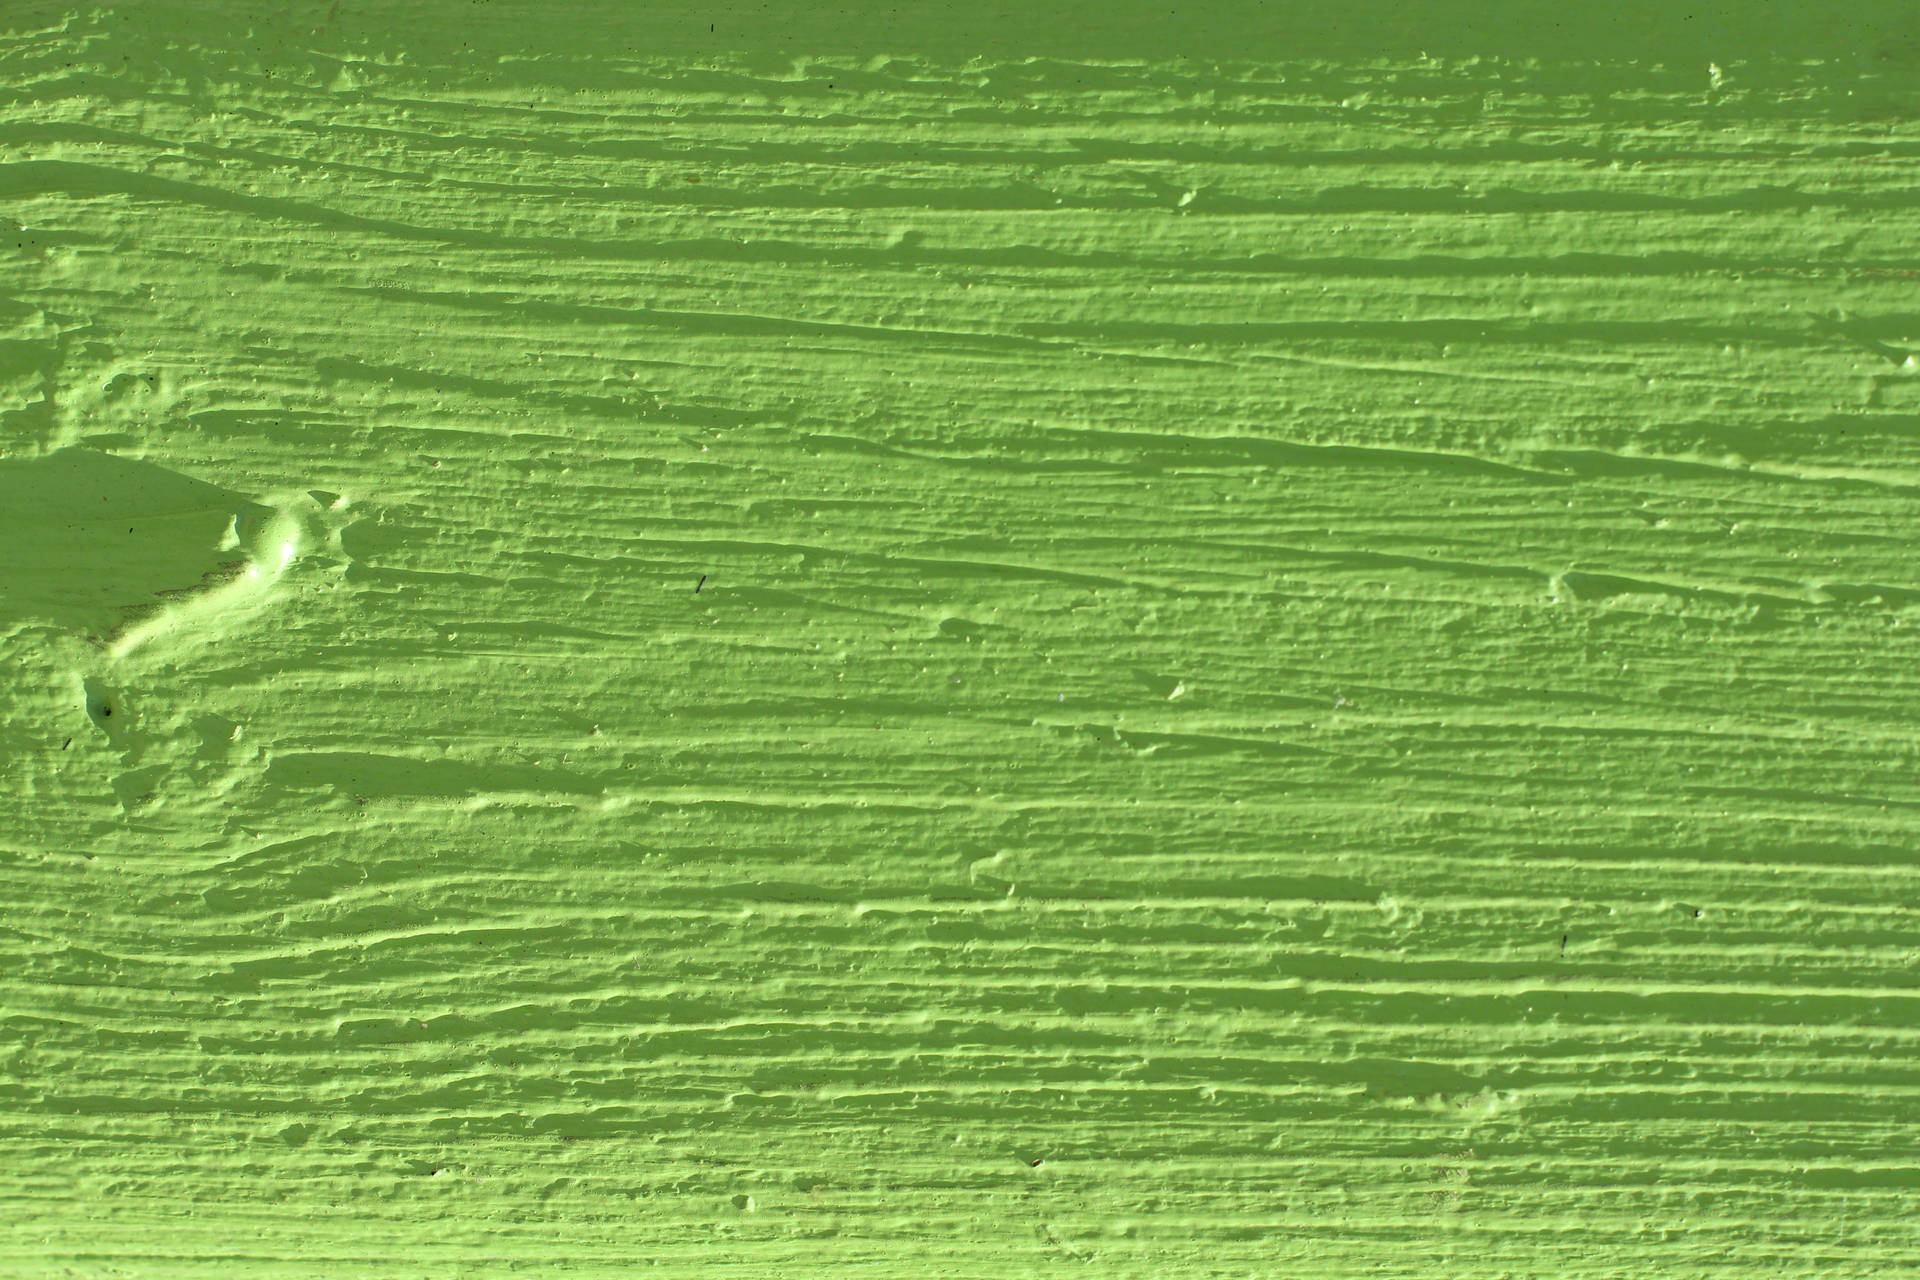 Sage Green 5184X3456 Wallpaper and Background Image